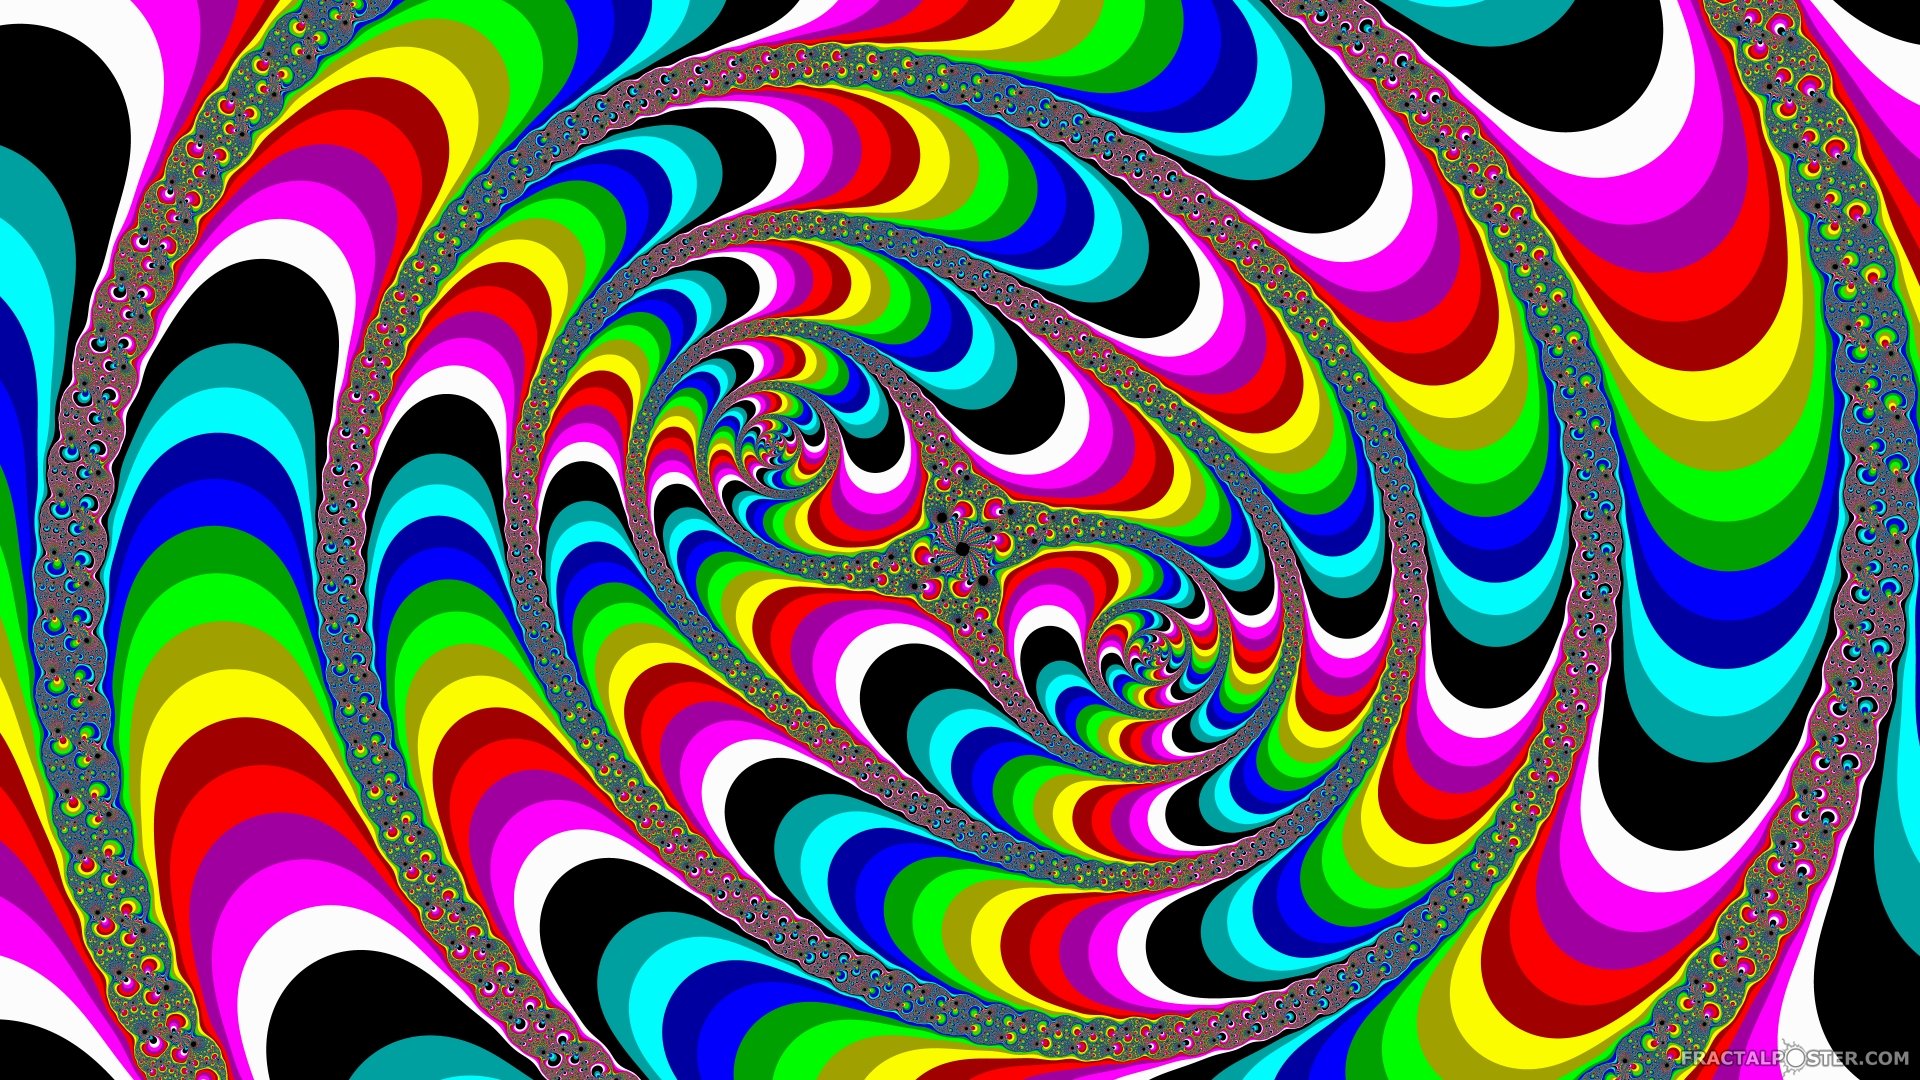 cool trippy wallpapers,pattern,design,colorfulness,psychedelic art,fractal art